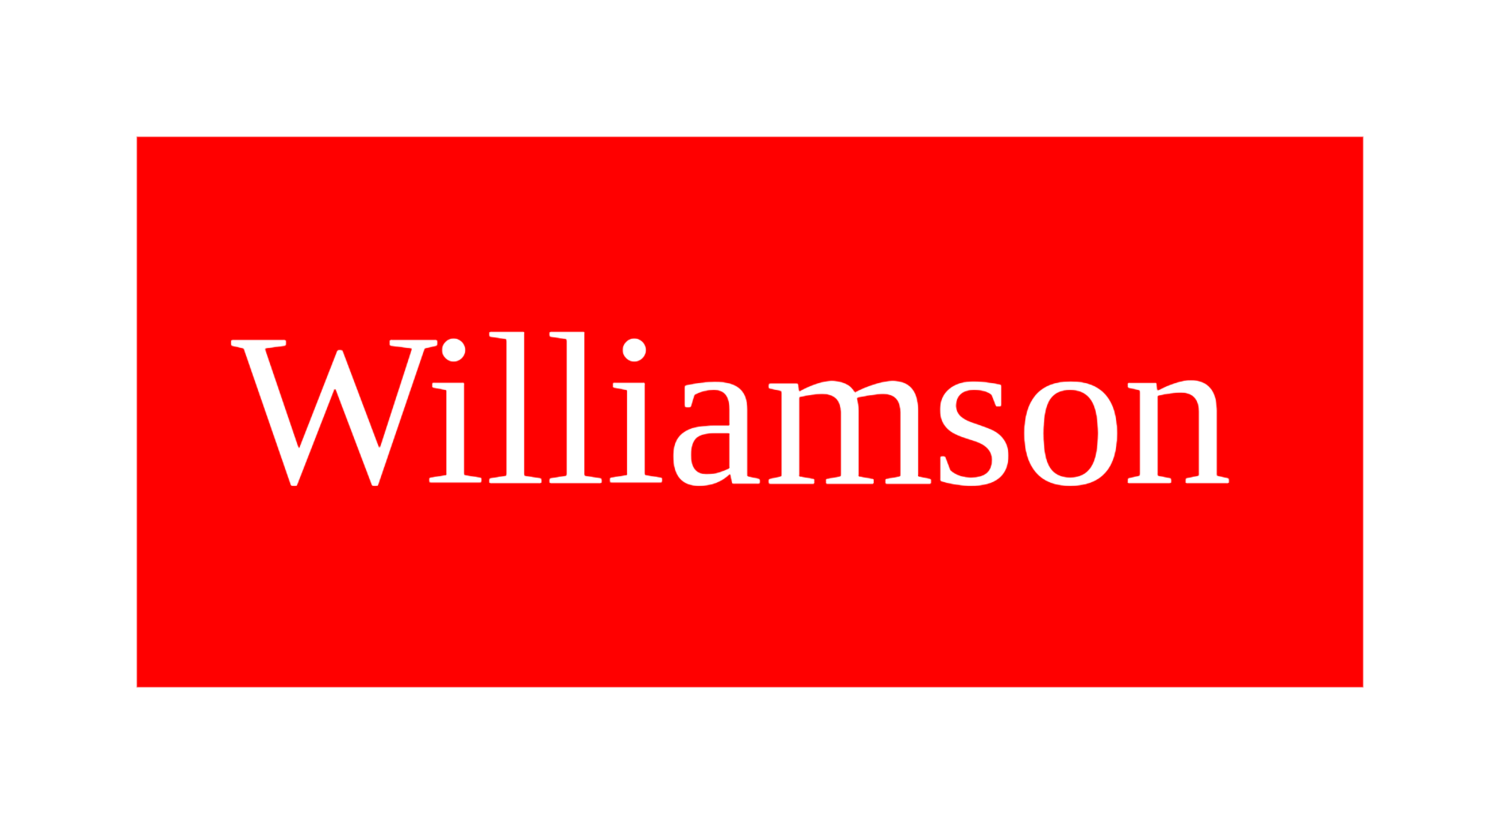 The Williamson Law Firm, LLC | Lawyers &amp; Attorneys Trenton, NJ | Personal Injury, Civil Litigation, Real Estate &amp; DUI&#39;s 